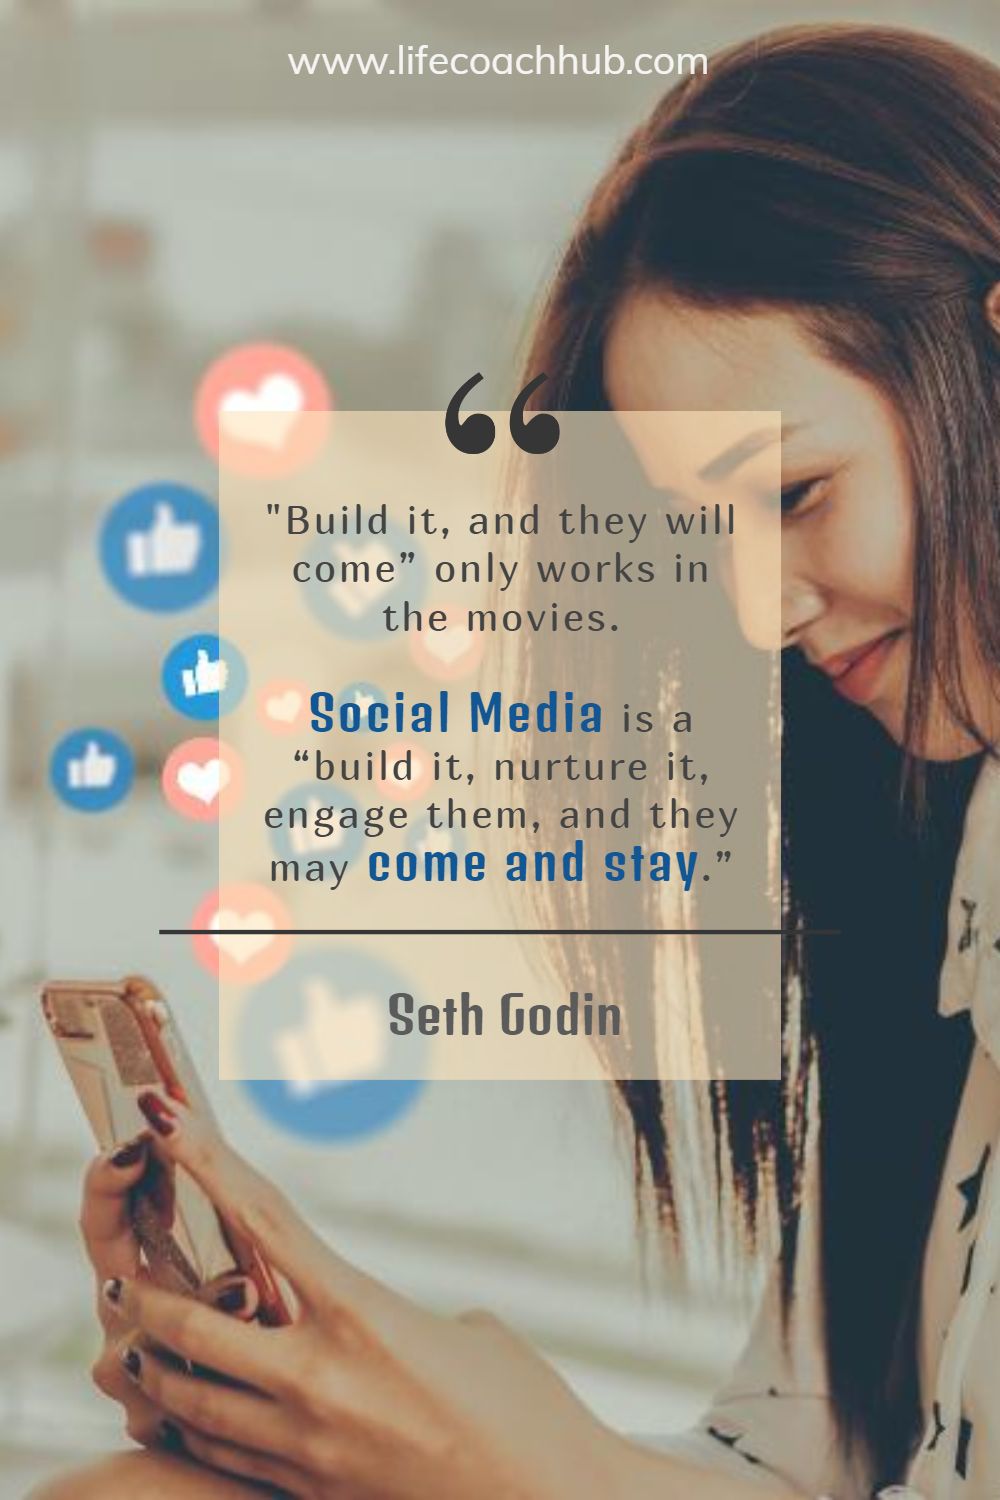 "Build it, and they will come” only works in the movies. Social Media is a “build it, nurture it, engage them, and they may come and stay.” Seth Godin Coaching Quote